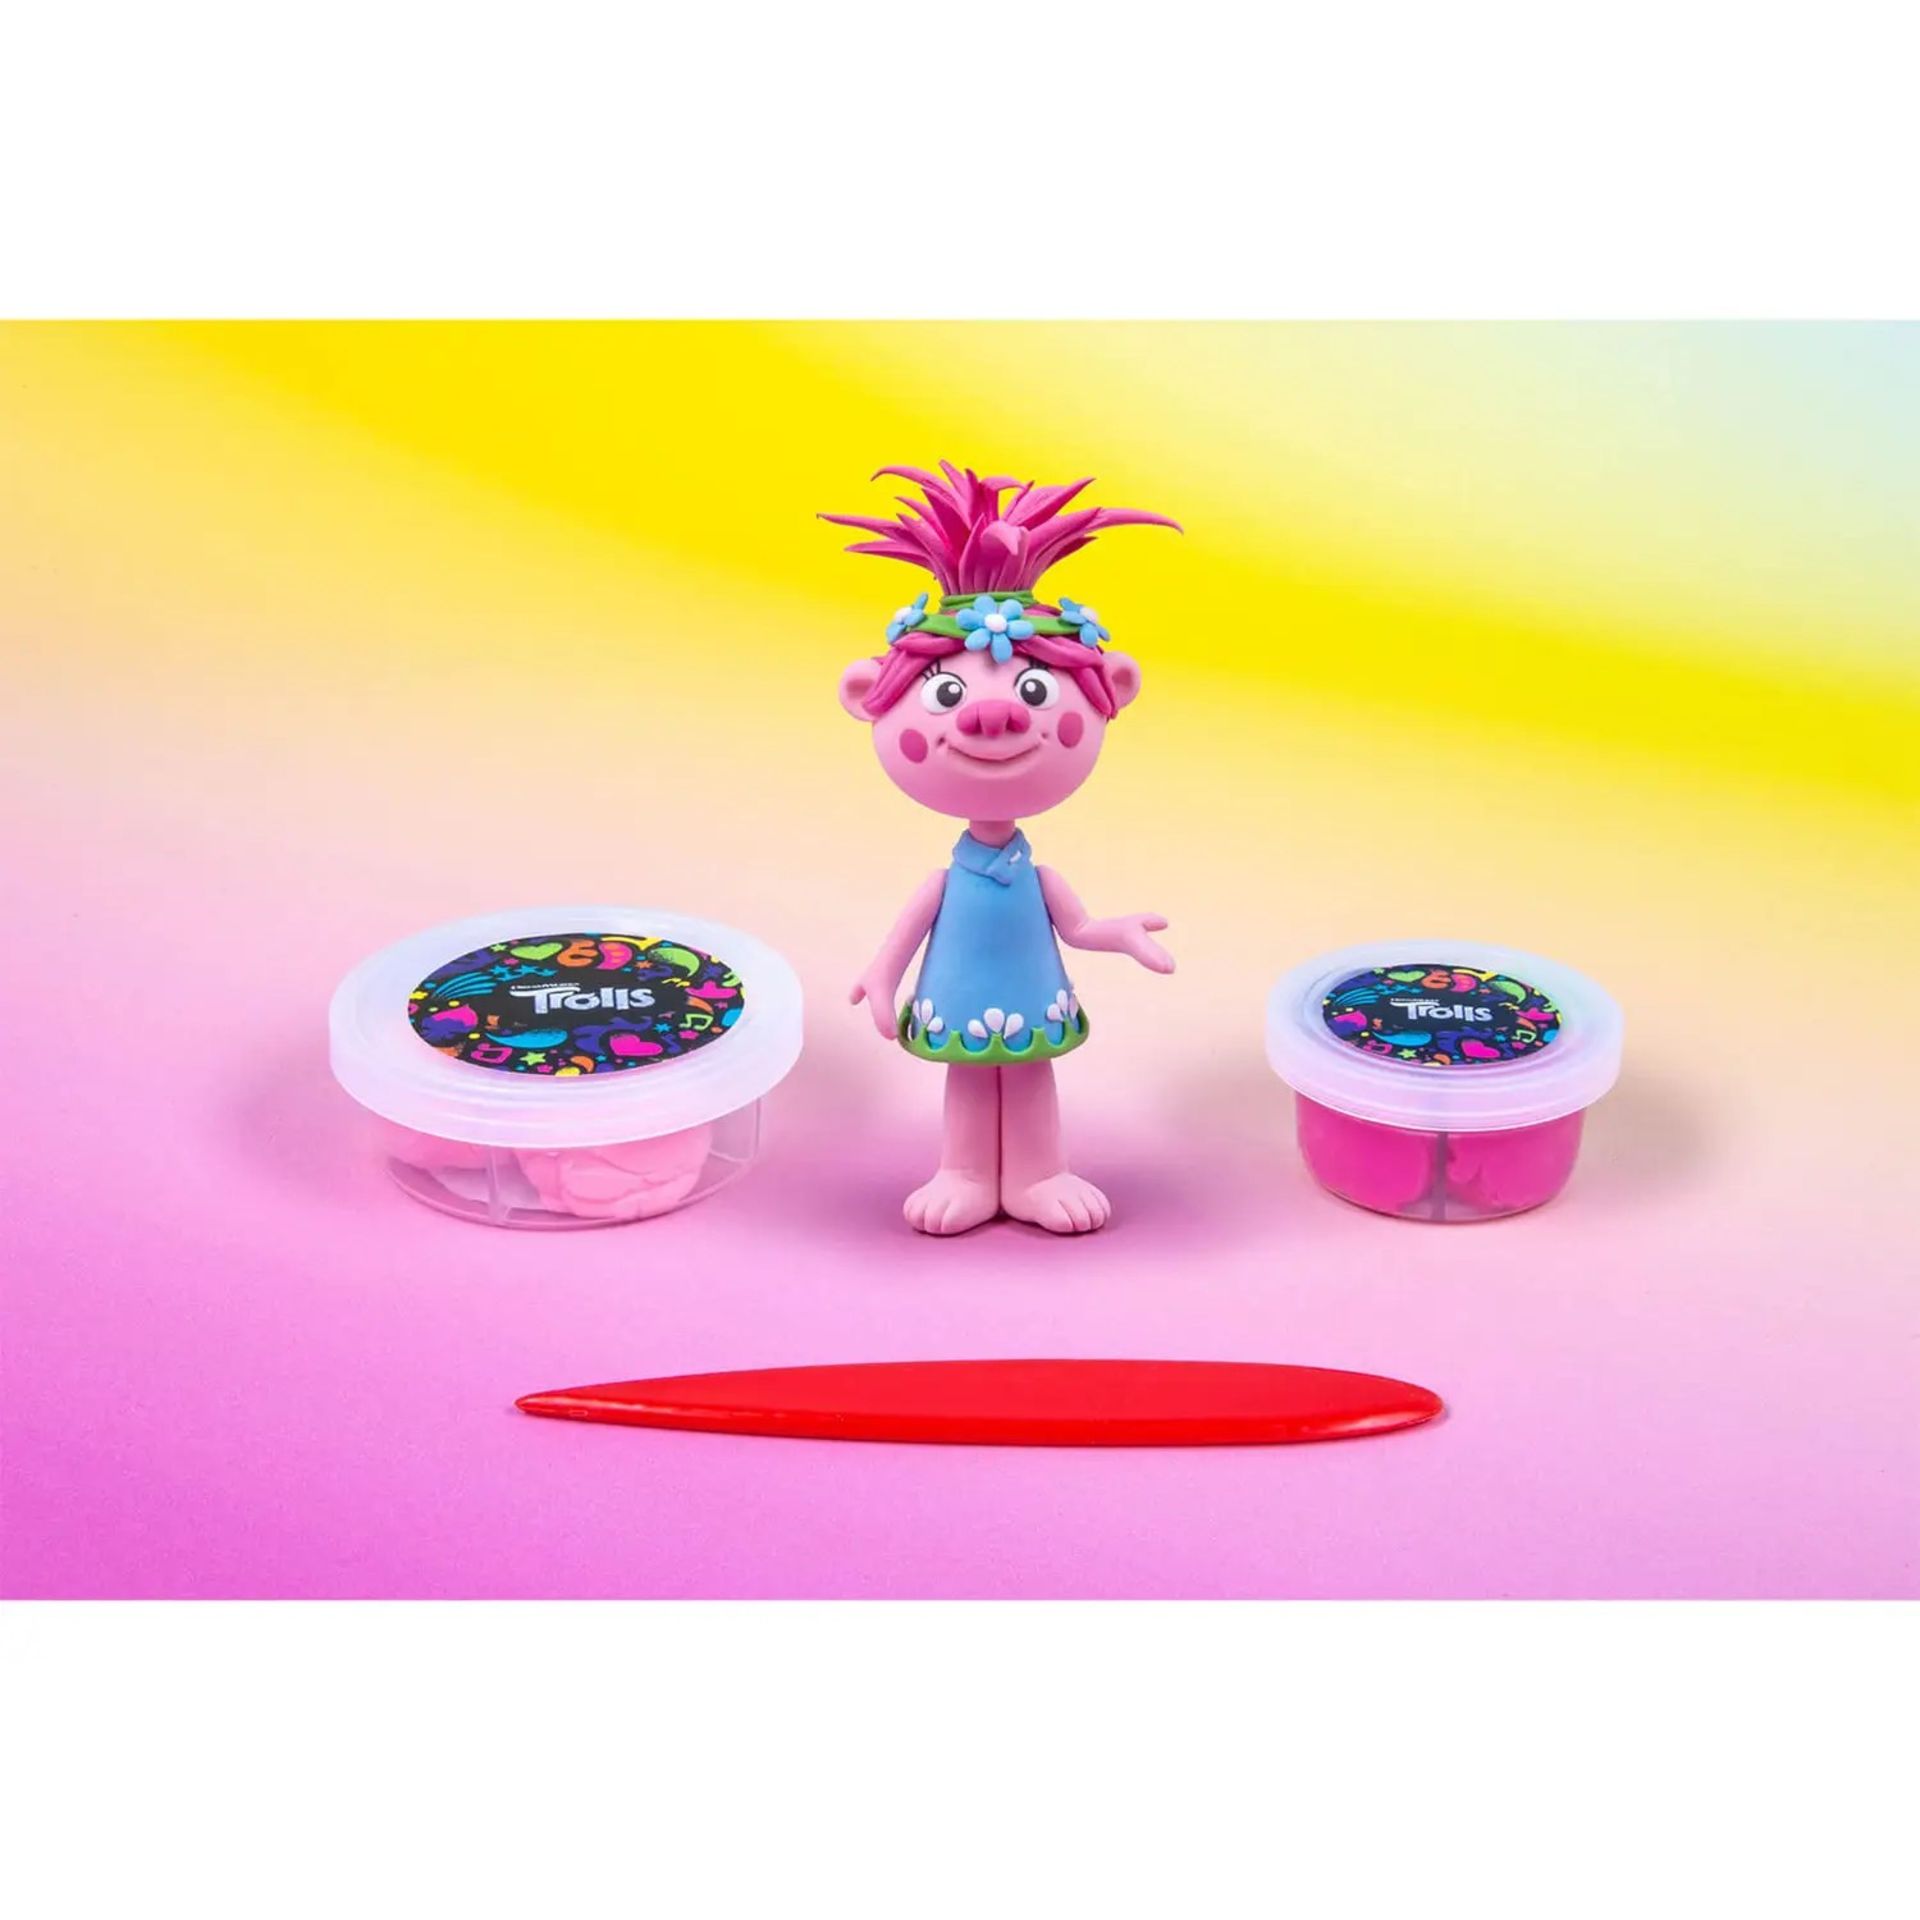 New Trolls World Tour Make Your Own Poppy - Image 2 of 2